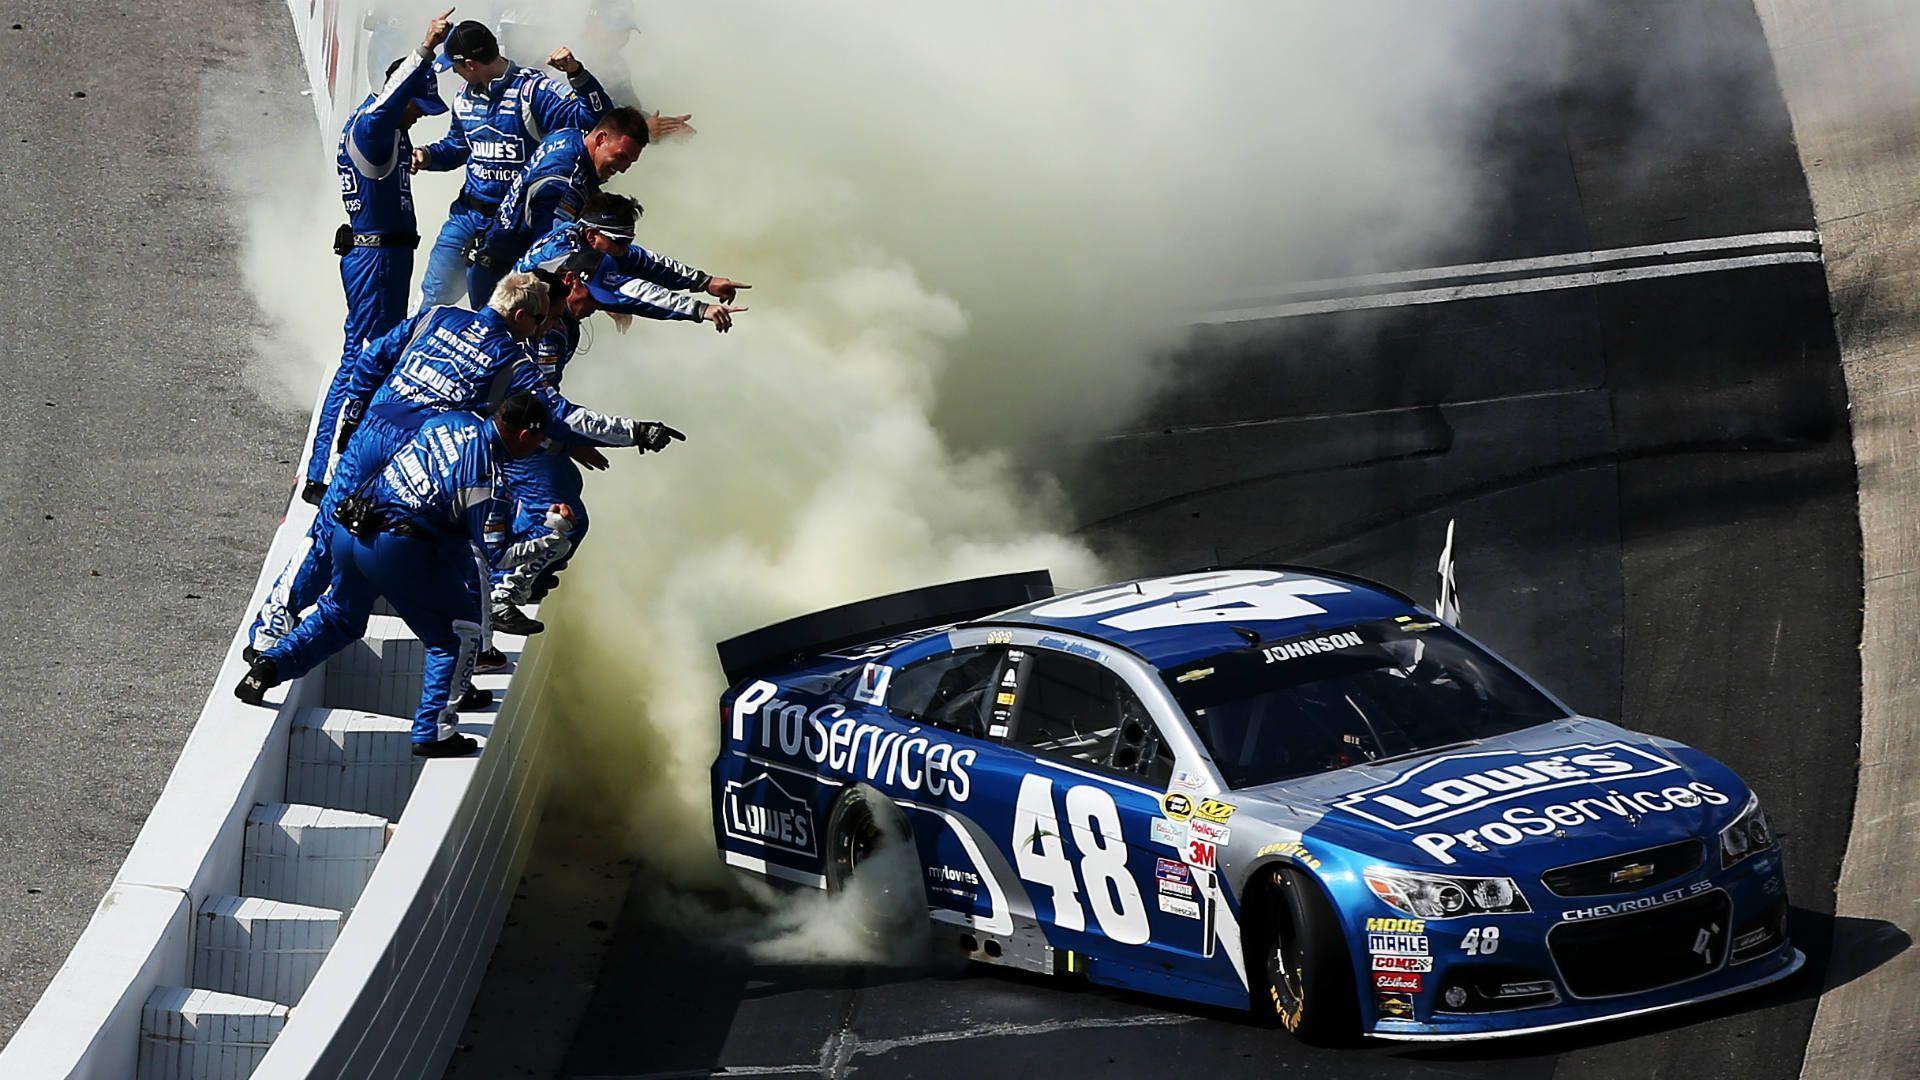 Jimmie Johnson paces himself to 10th win